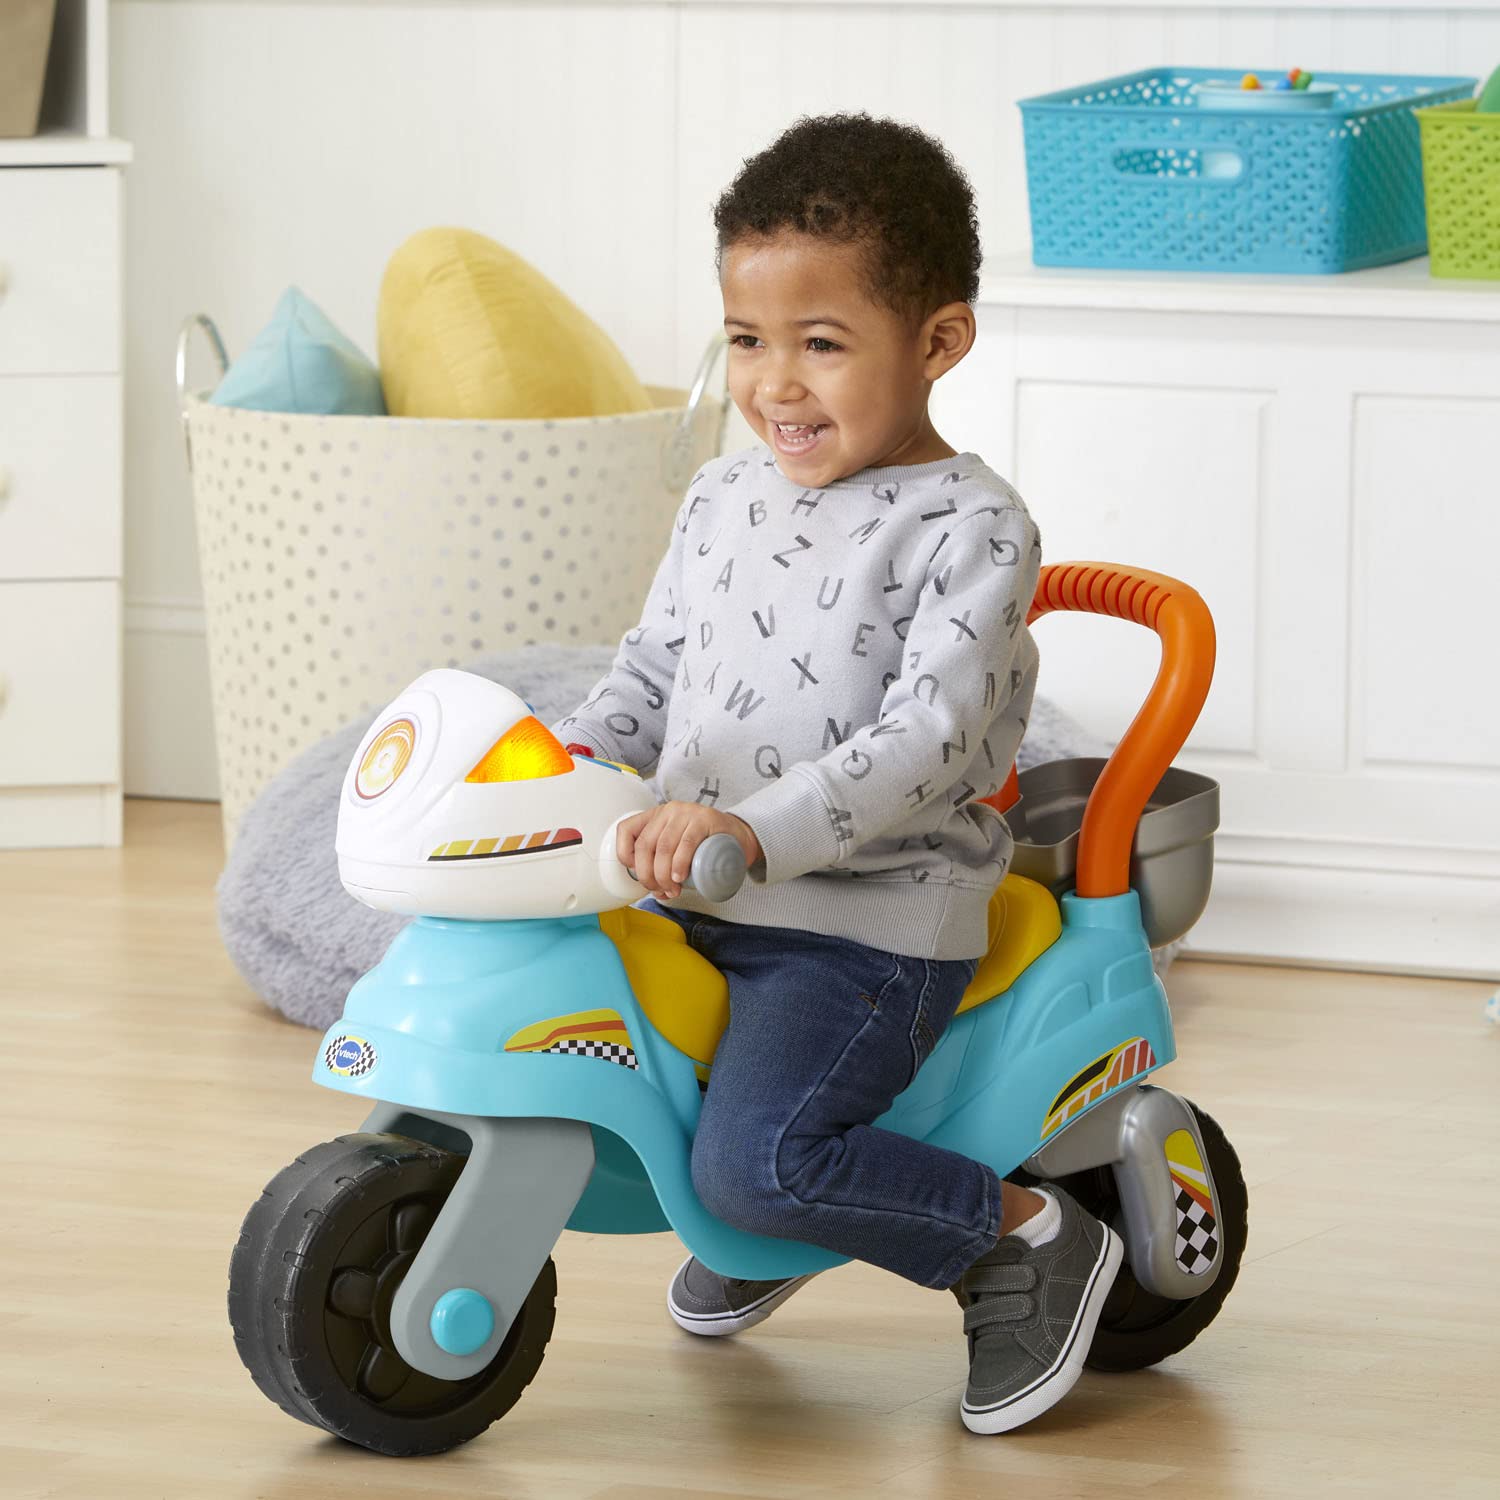 VTech 3-in-1 Step and Roll Motorbike (Frustration Free Packaging)